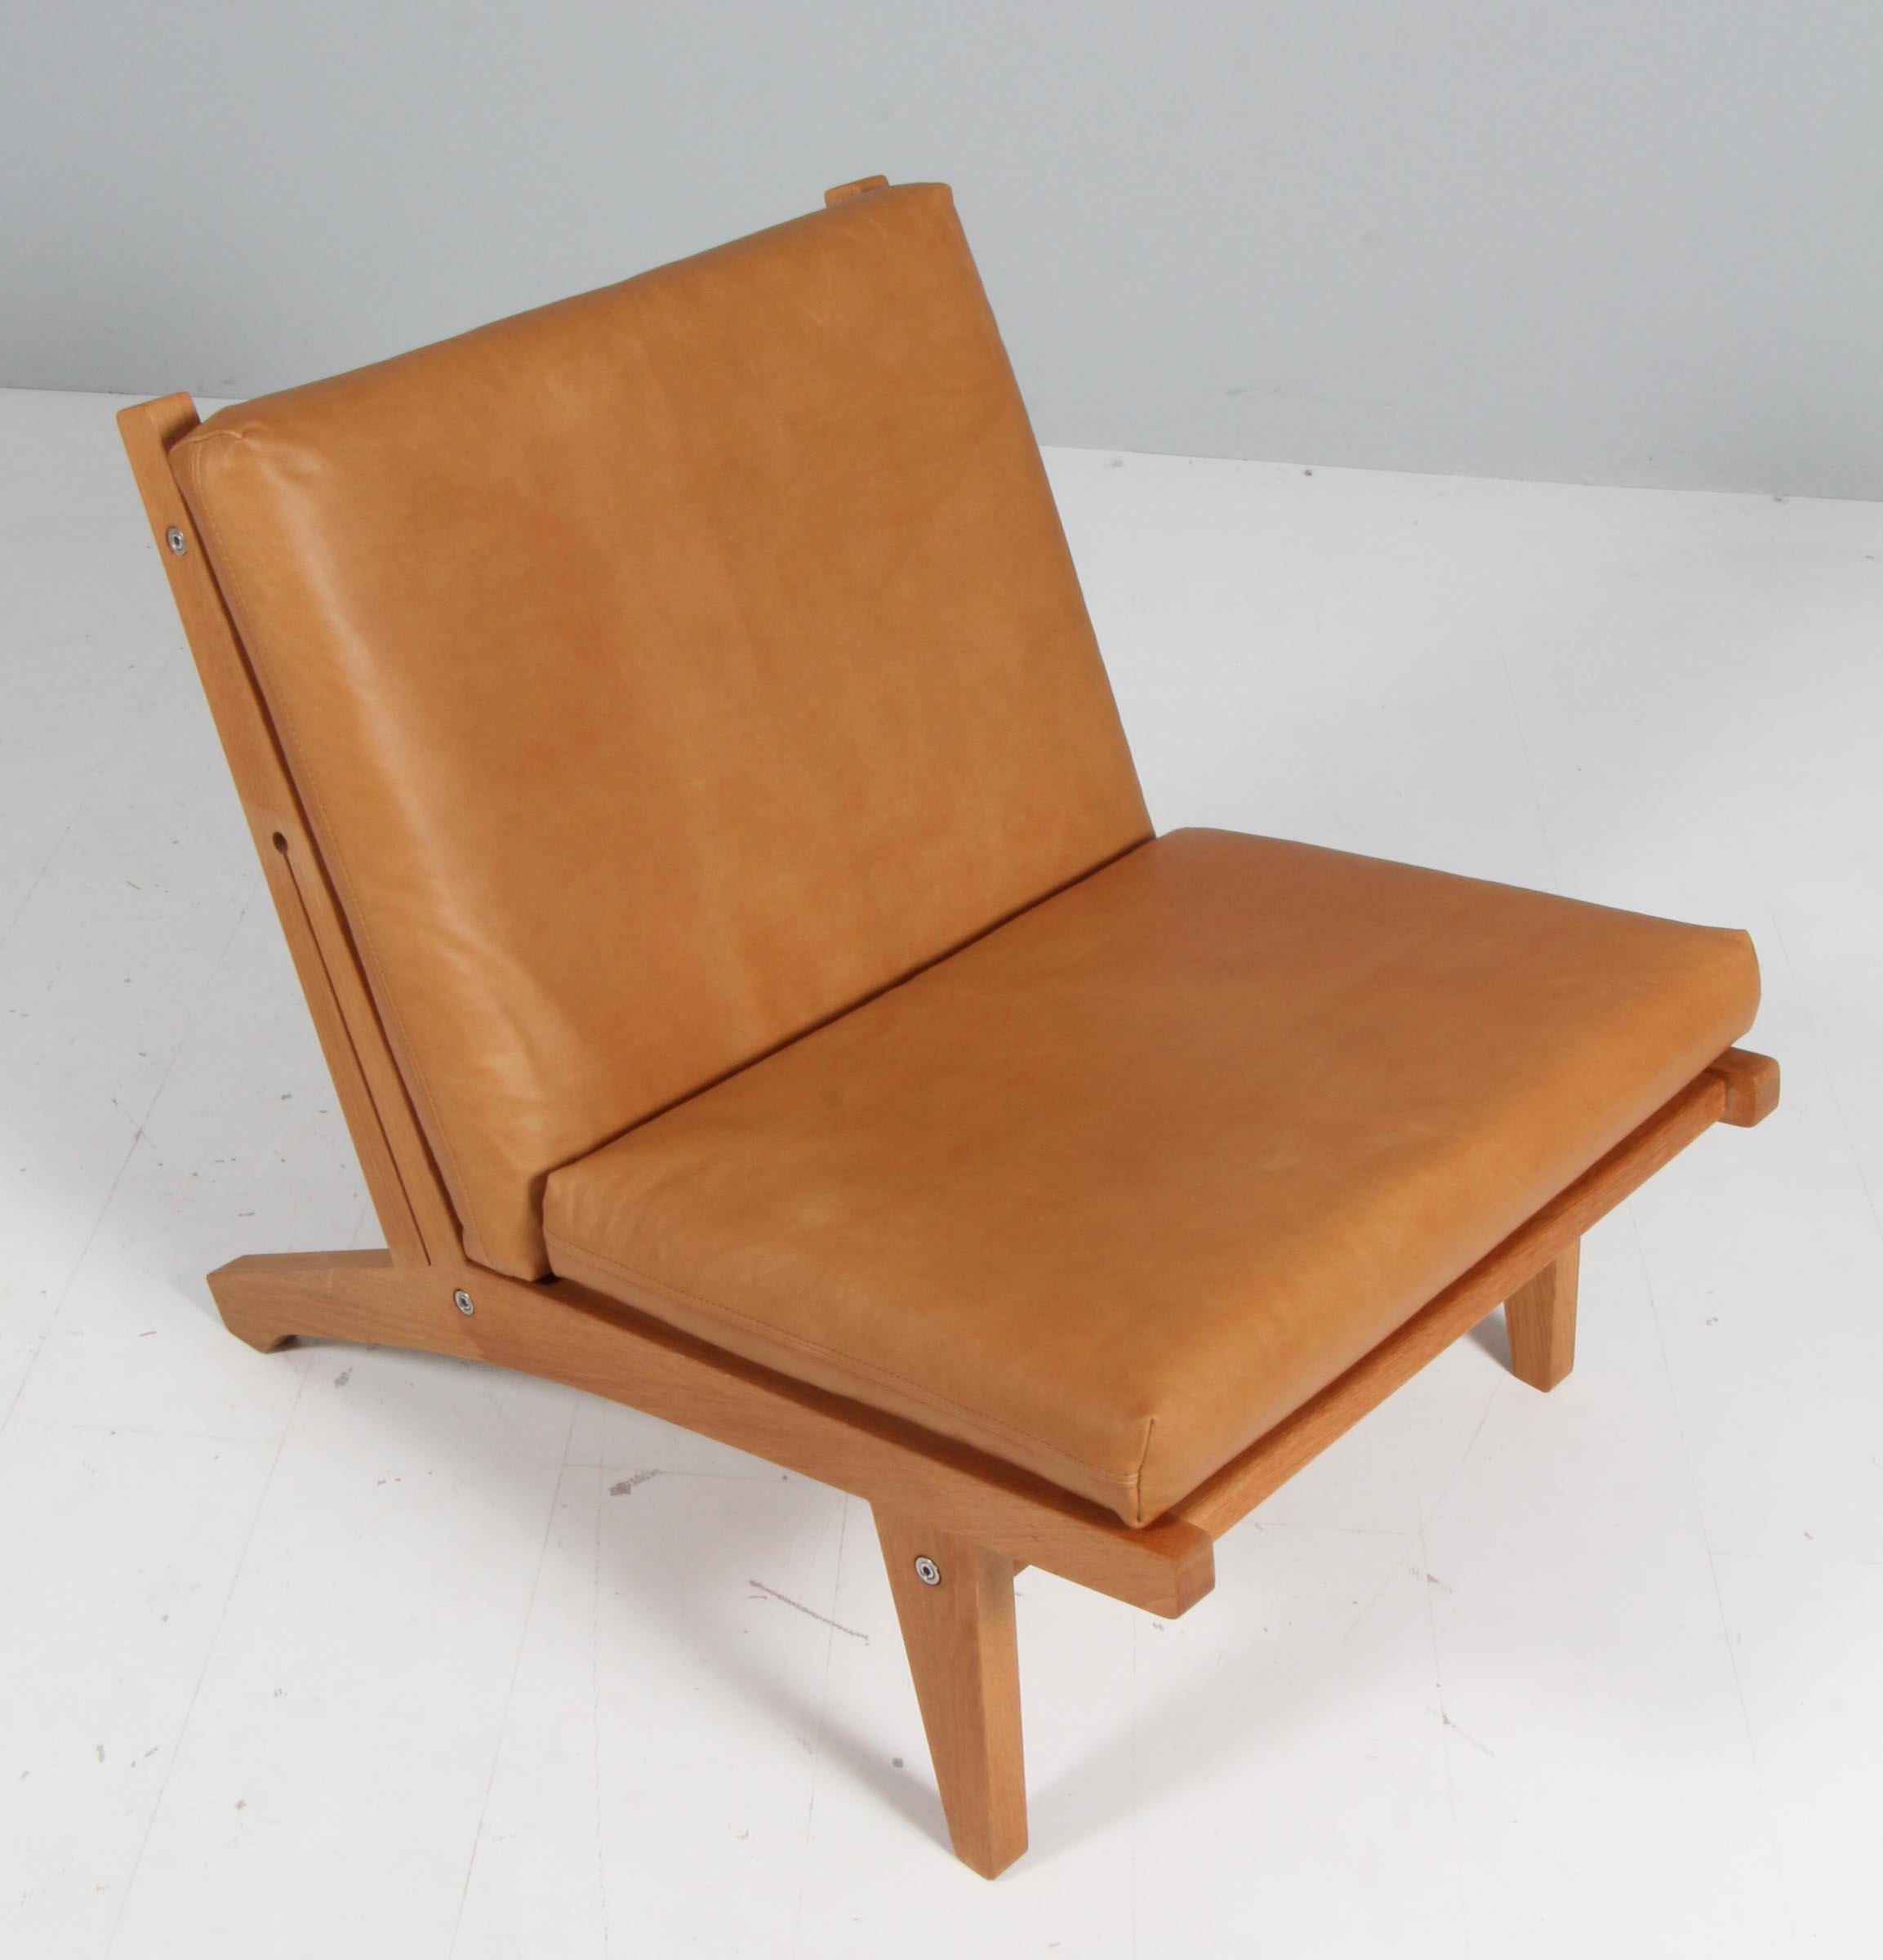 Hans J. Wegner lounge chair with loose cushions new upholstered with vintage tan full grain aniline leather.

Frame of solid oak

Model GE-370, made by GETAMA.